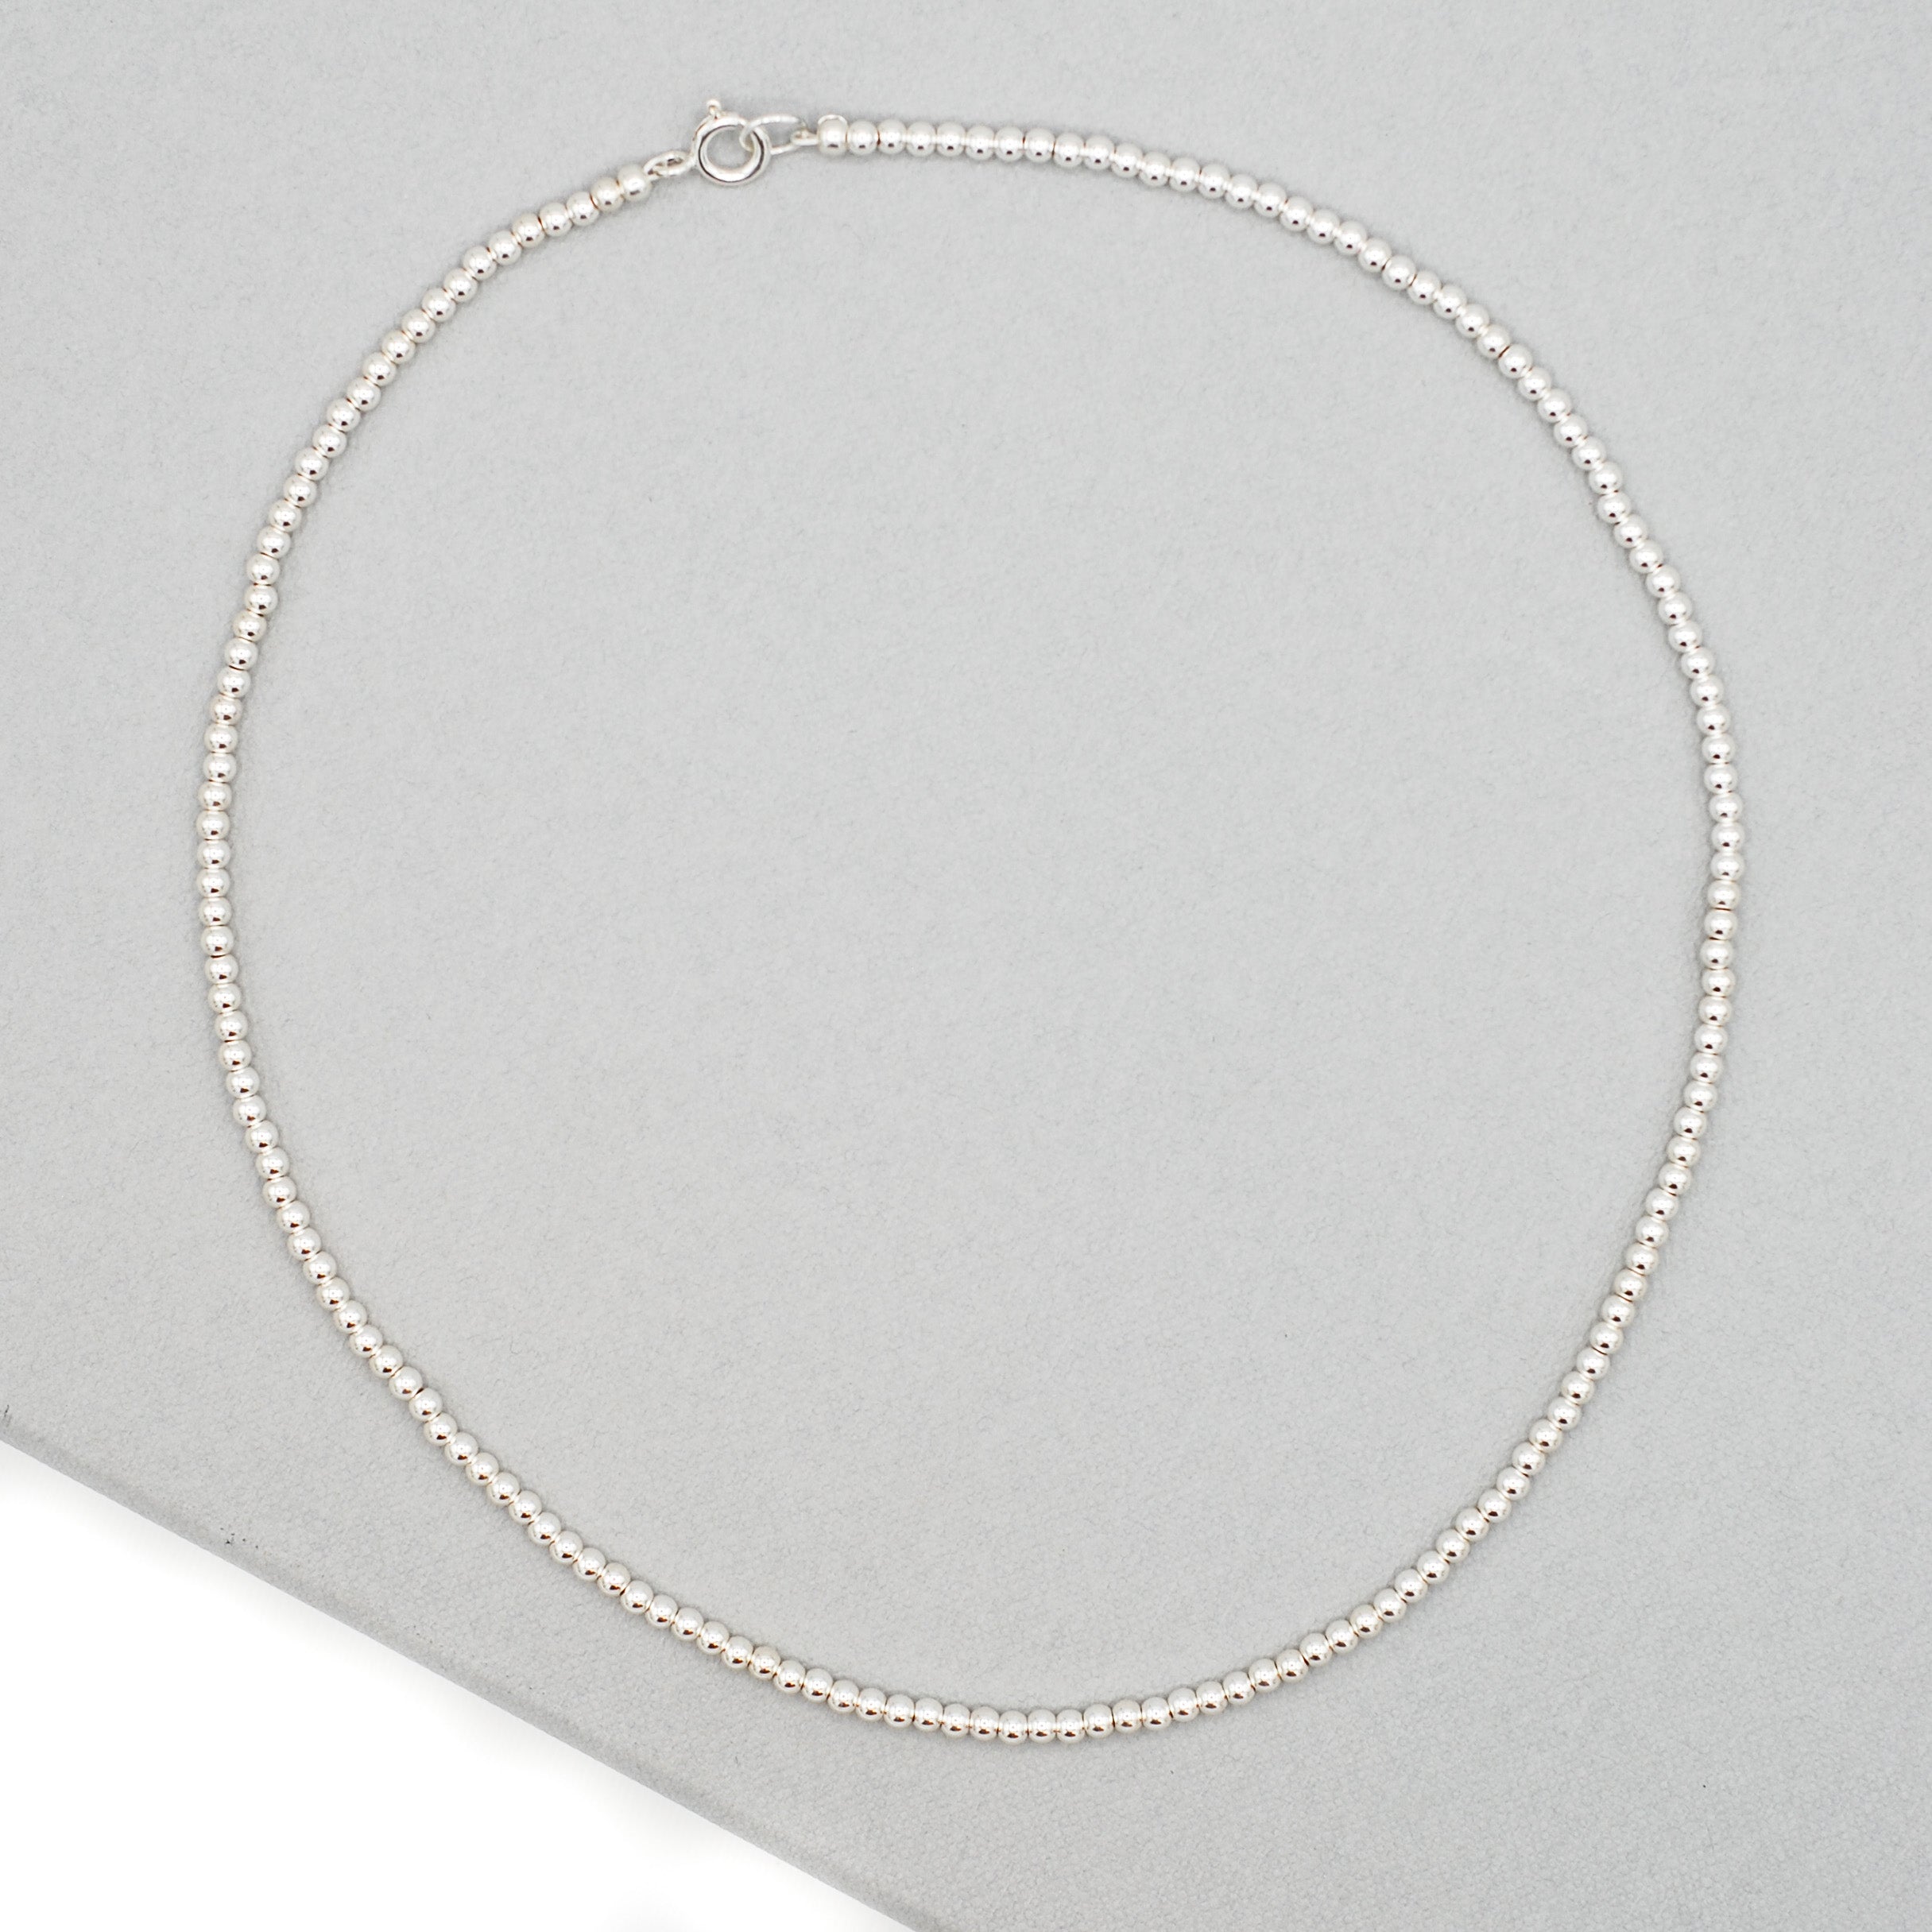 3mm Sterling Silver Beaded Lux Necklace